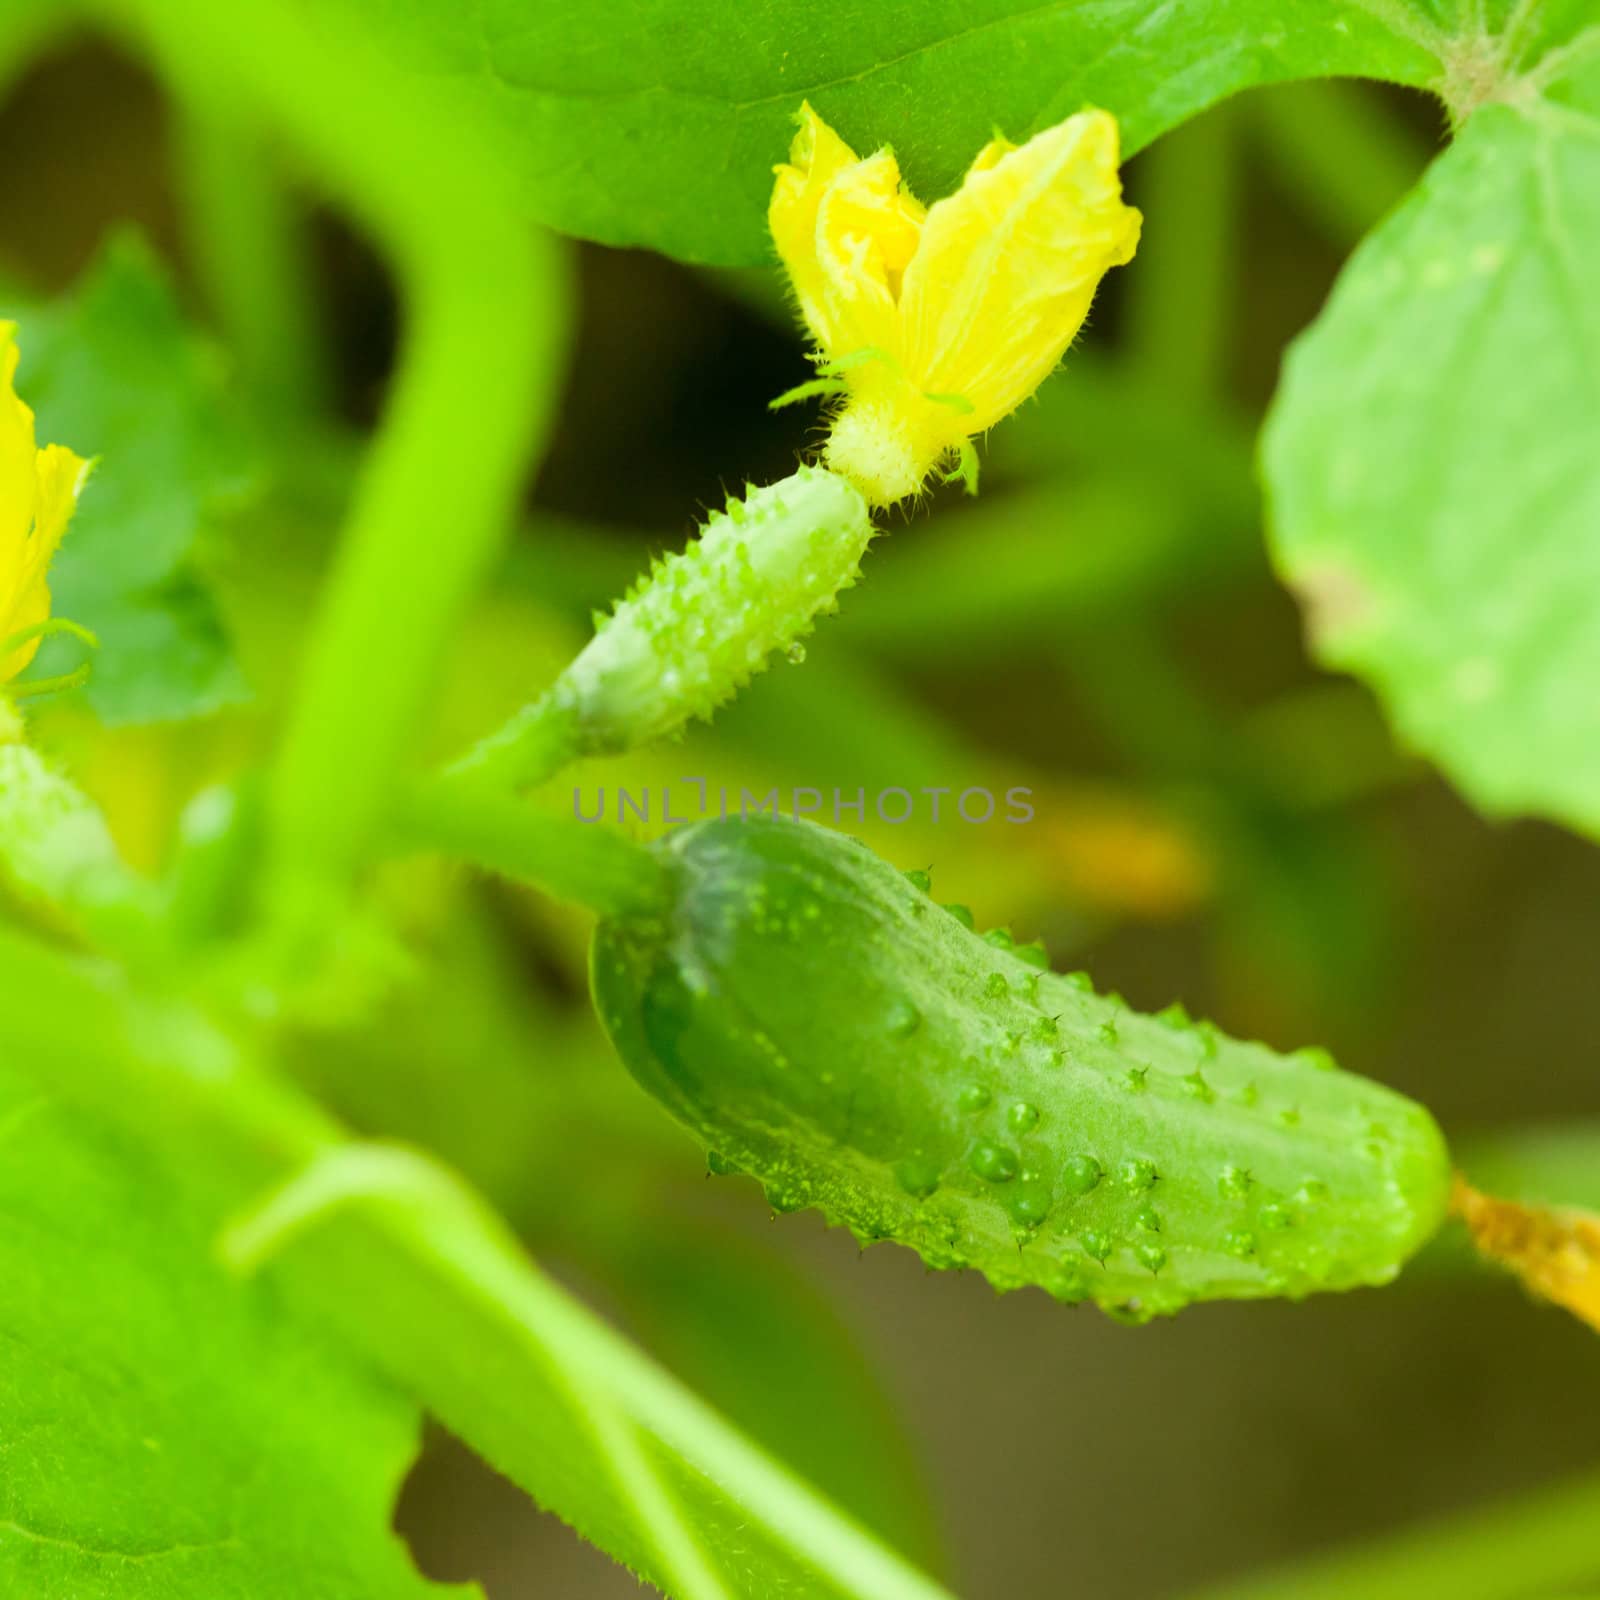 Green cucumbers with flowers by shebeko